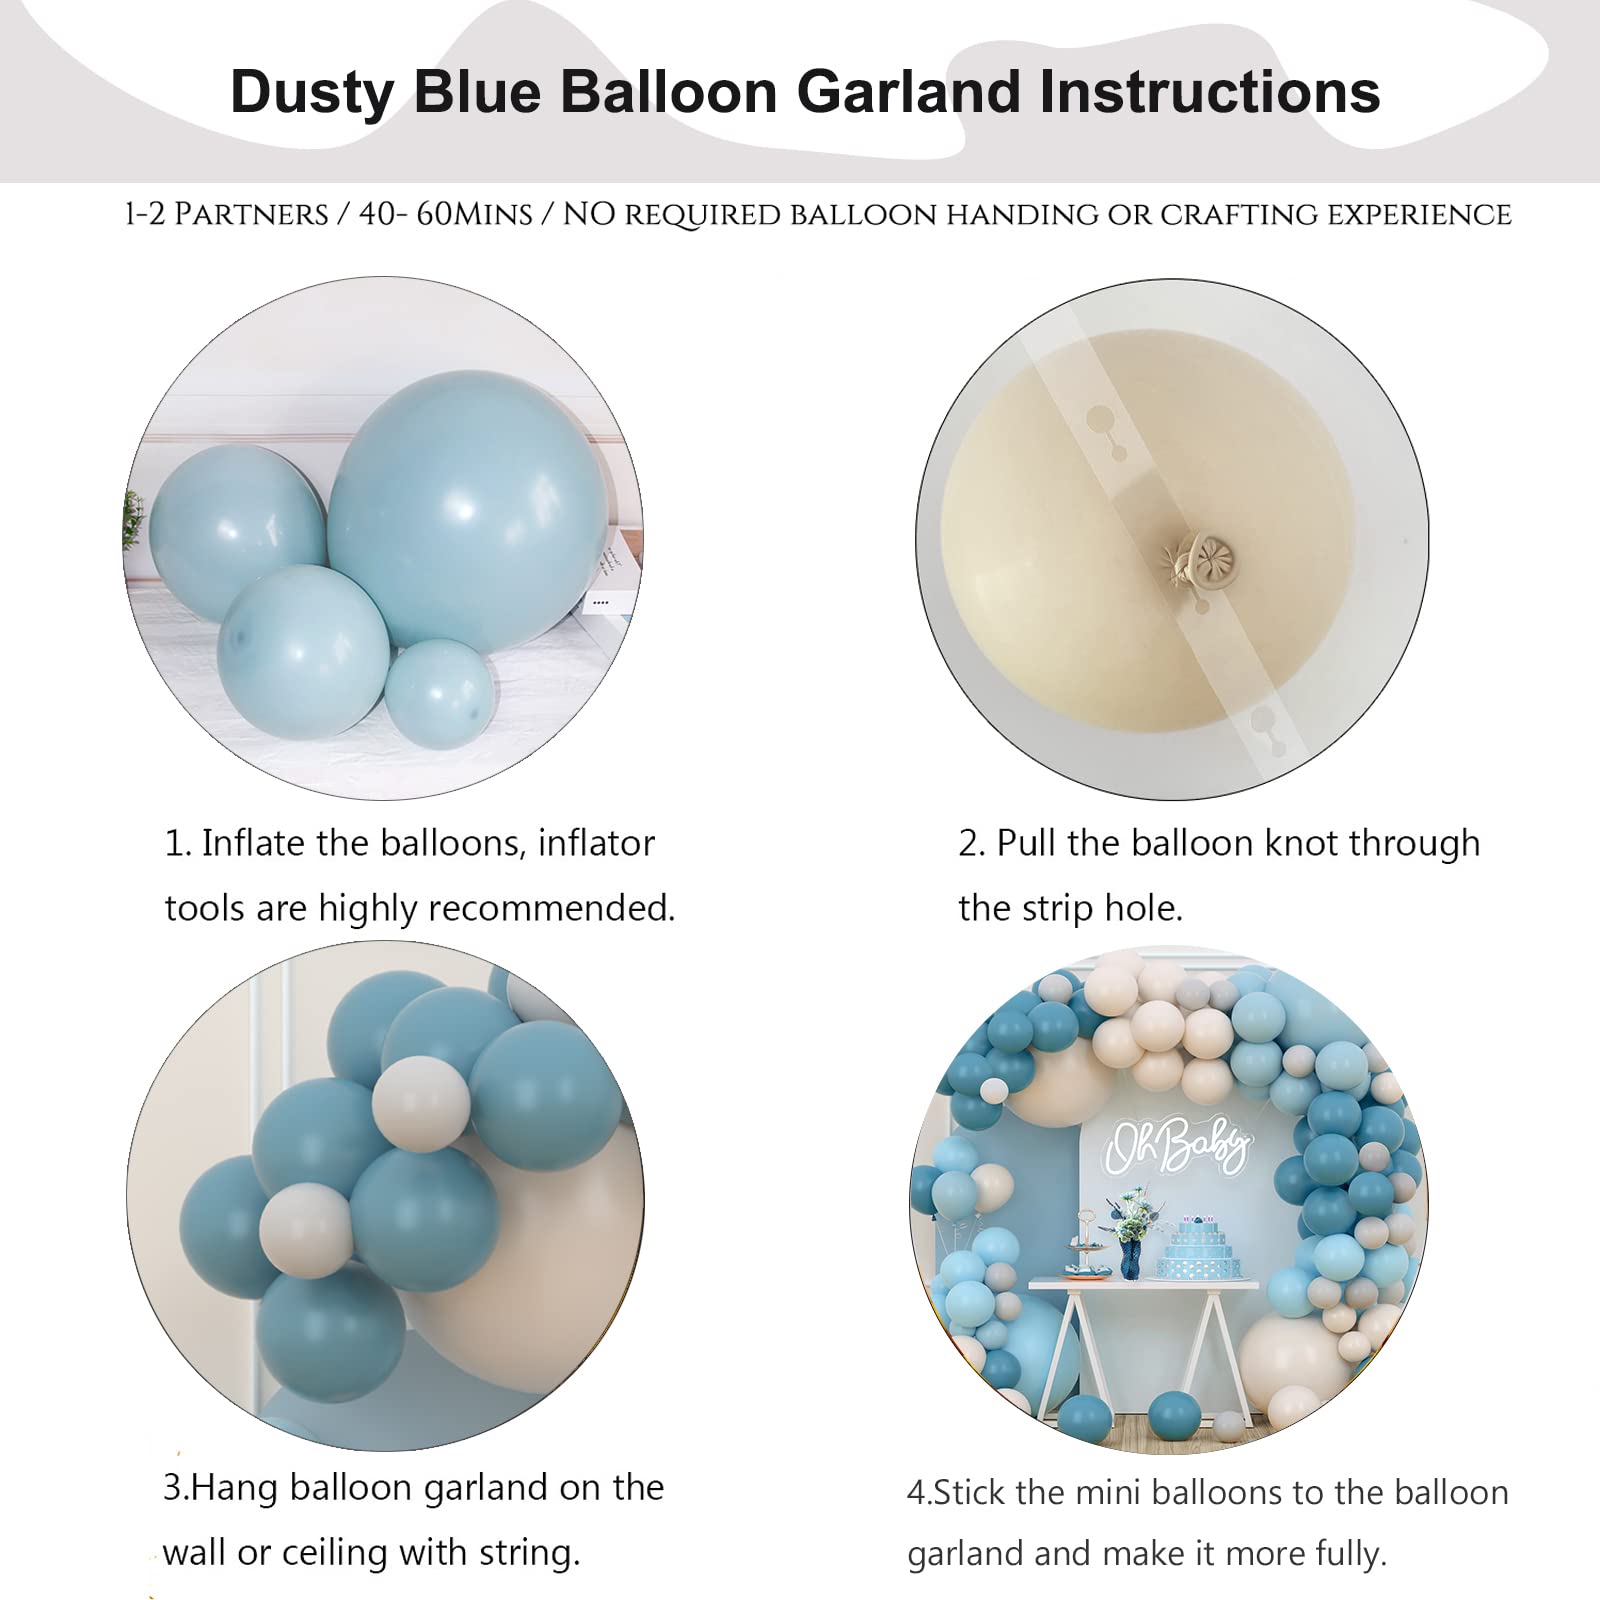 Dusty Blue Balloon Garland, Slate Blue Dusty Blue Pastel Blue Sand White Balloons Arch Kit for Boy Baby Shower Decorations Birthday Party Supplies